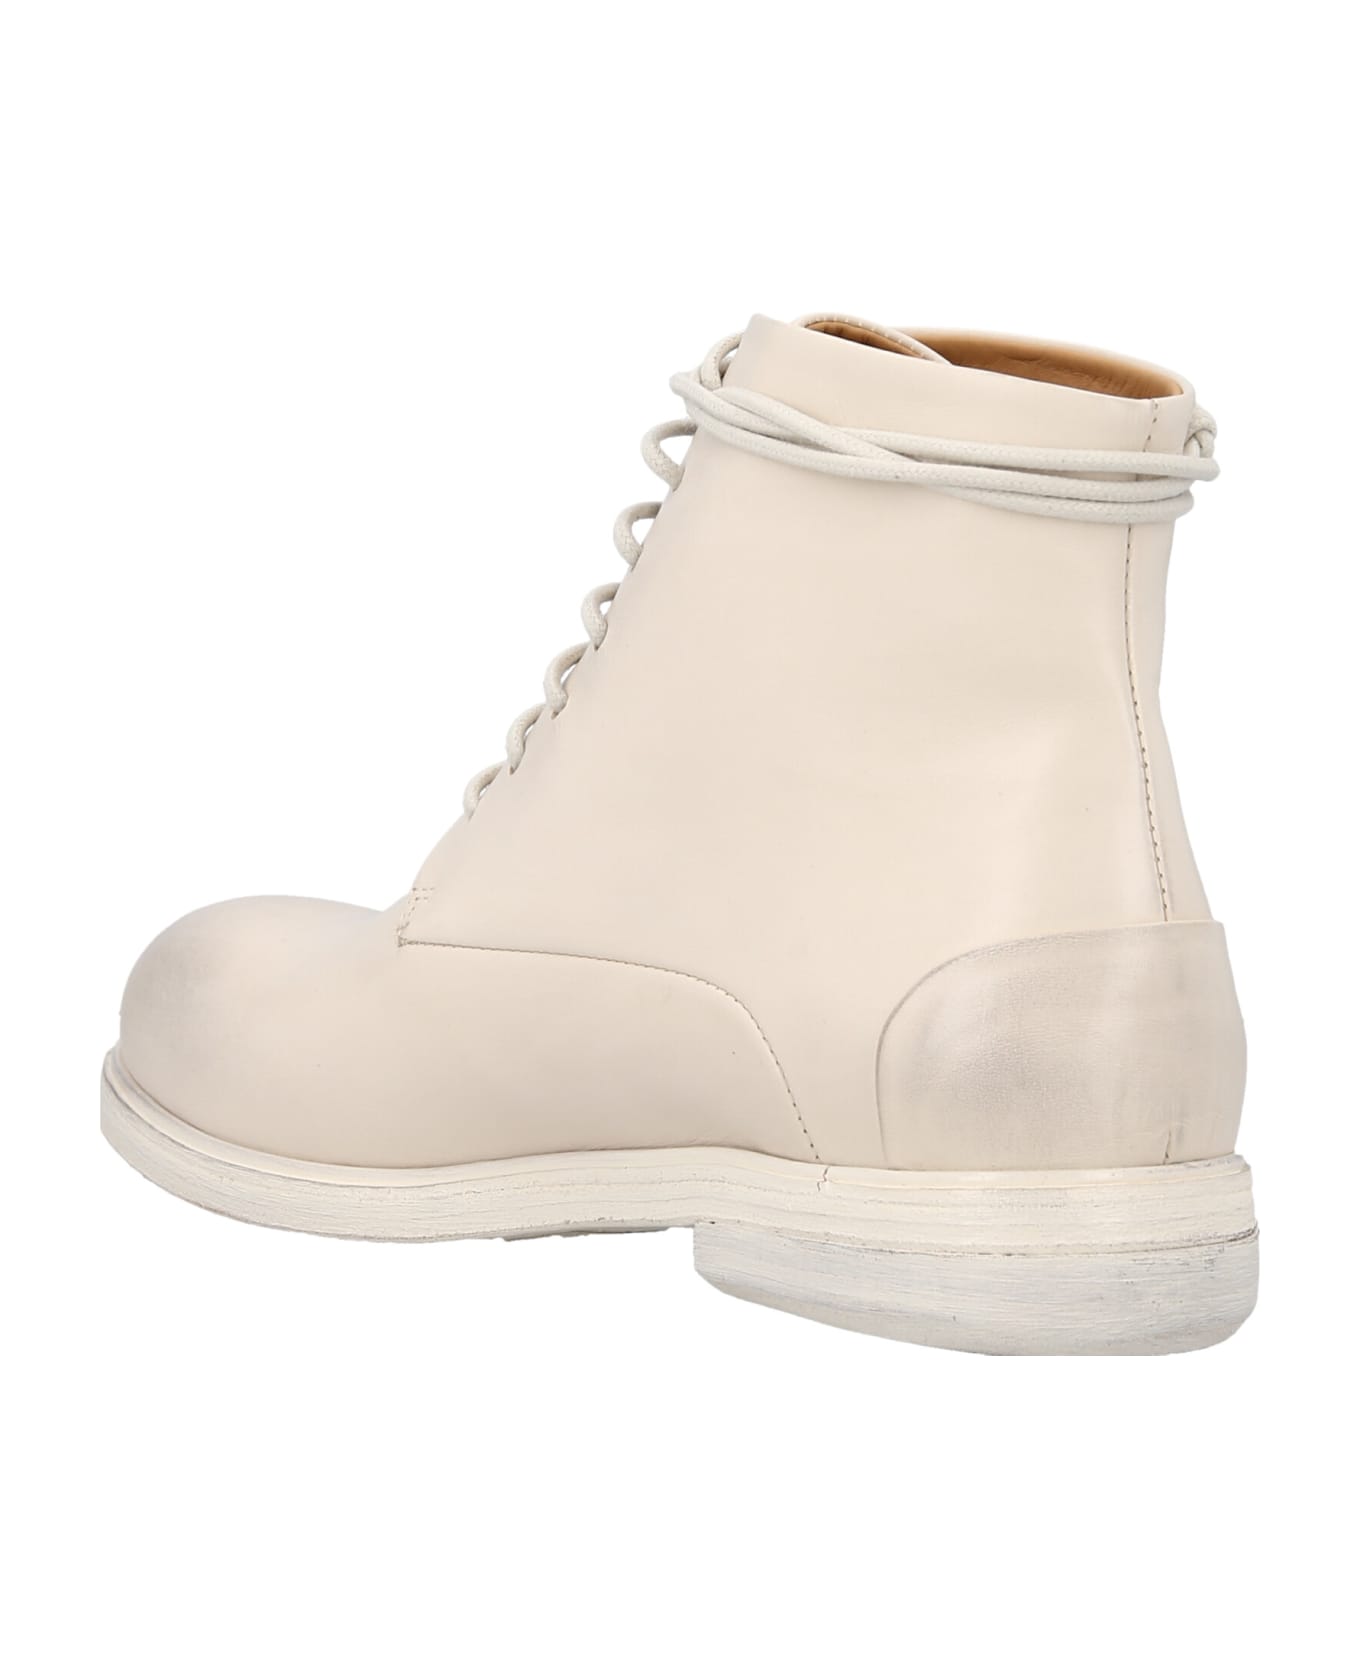 Marsell 'zucca Media' Ankle Boots - White ブーツ